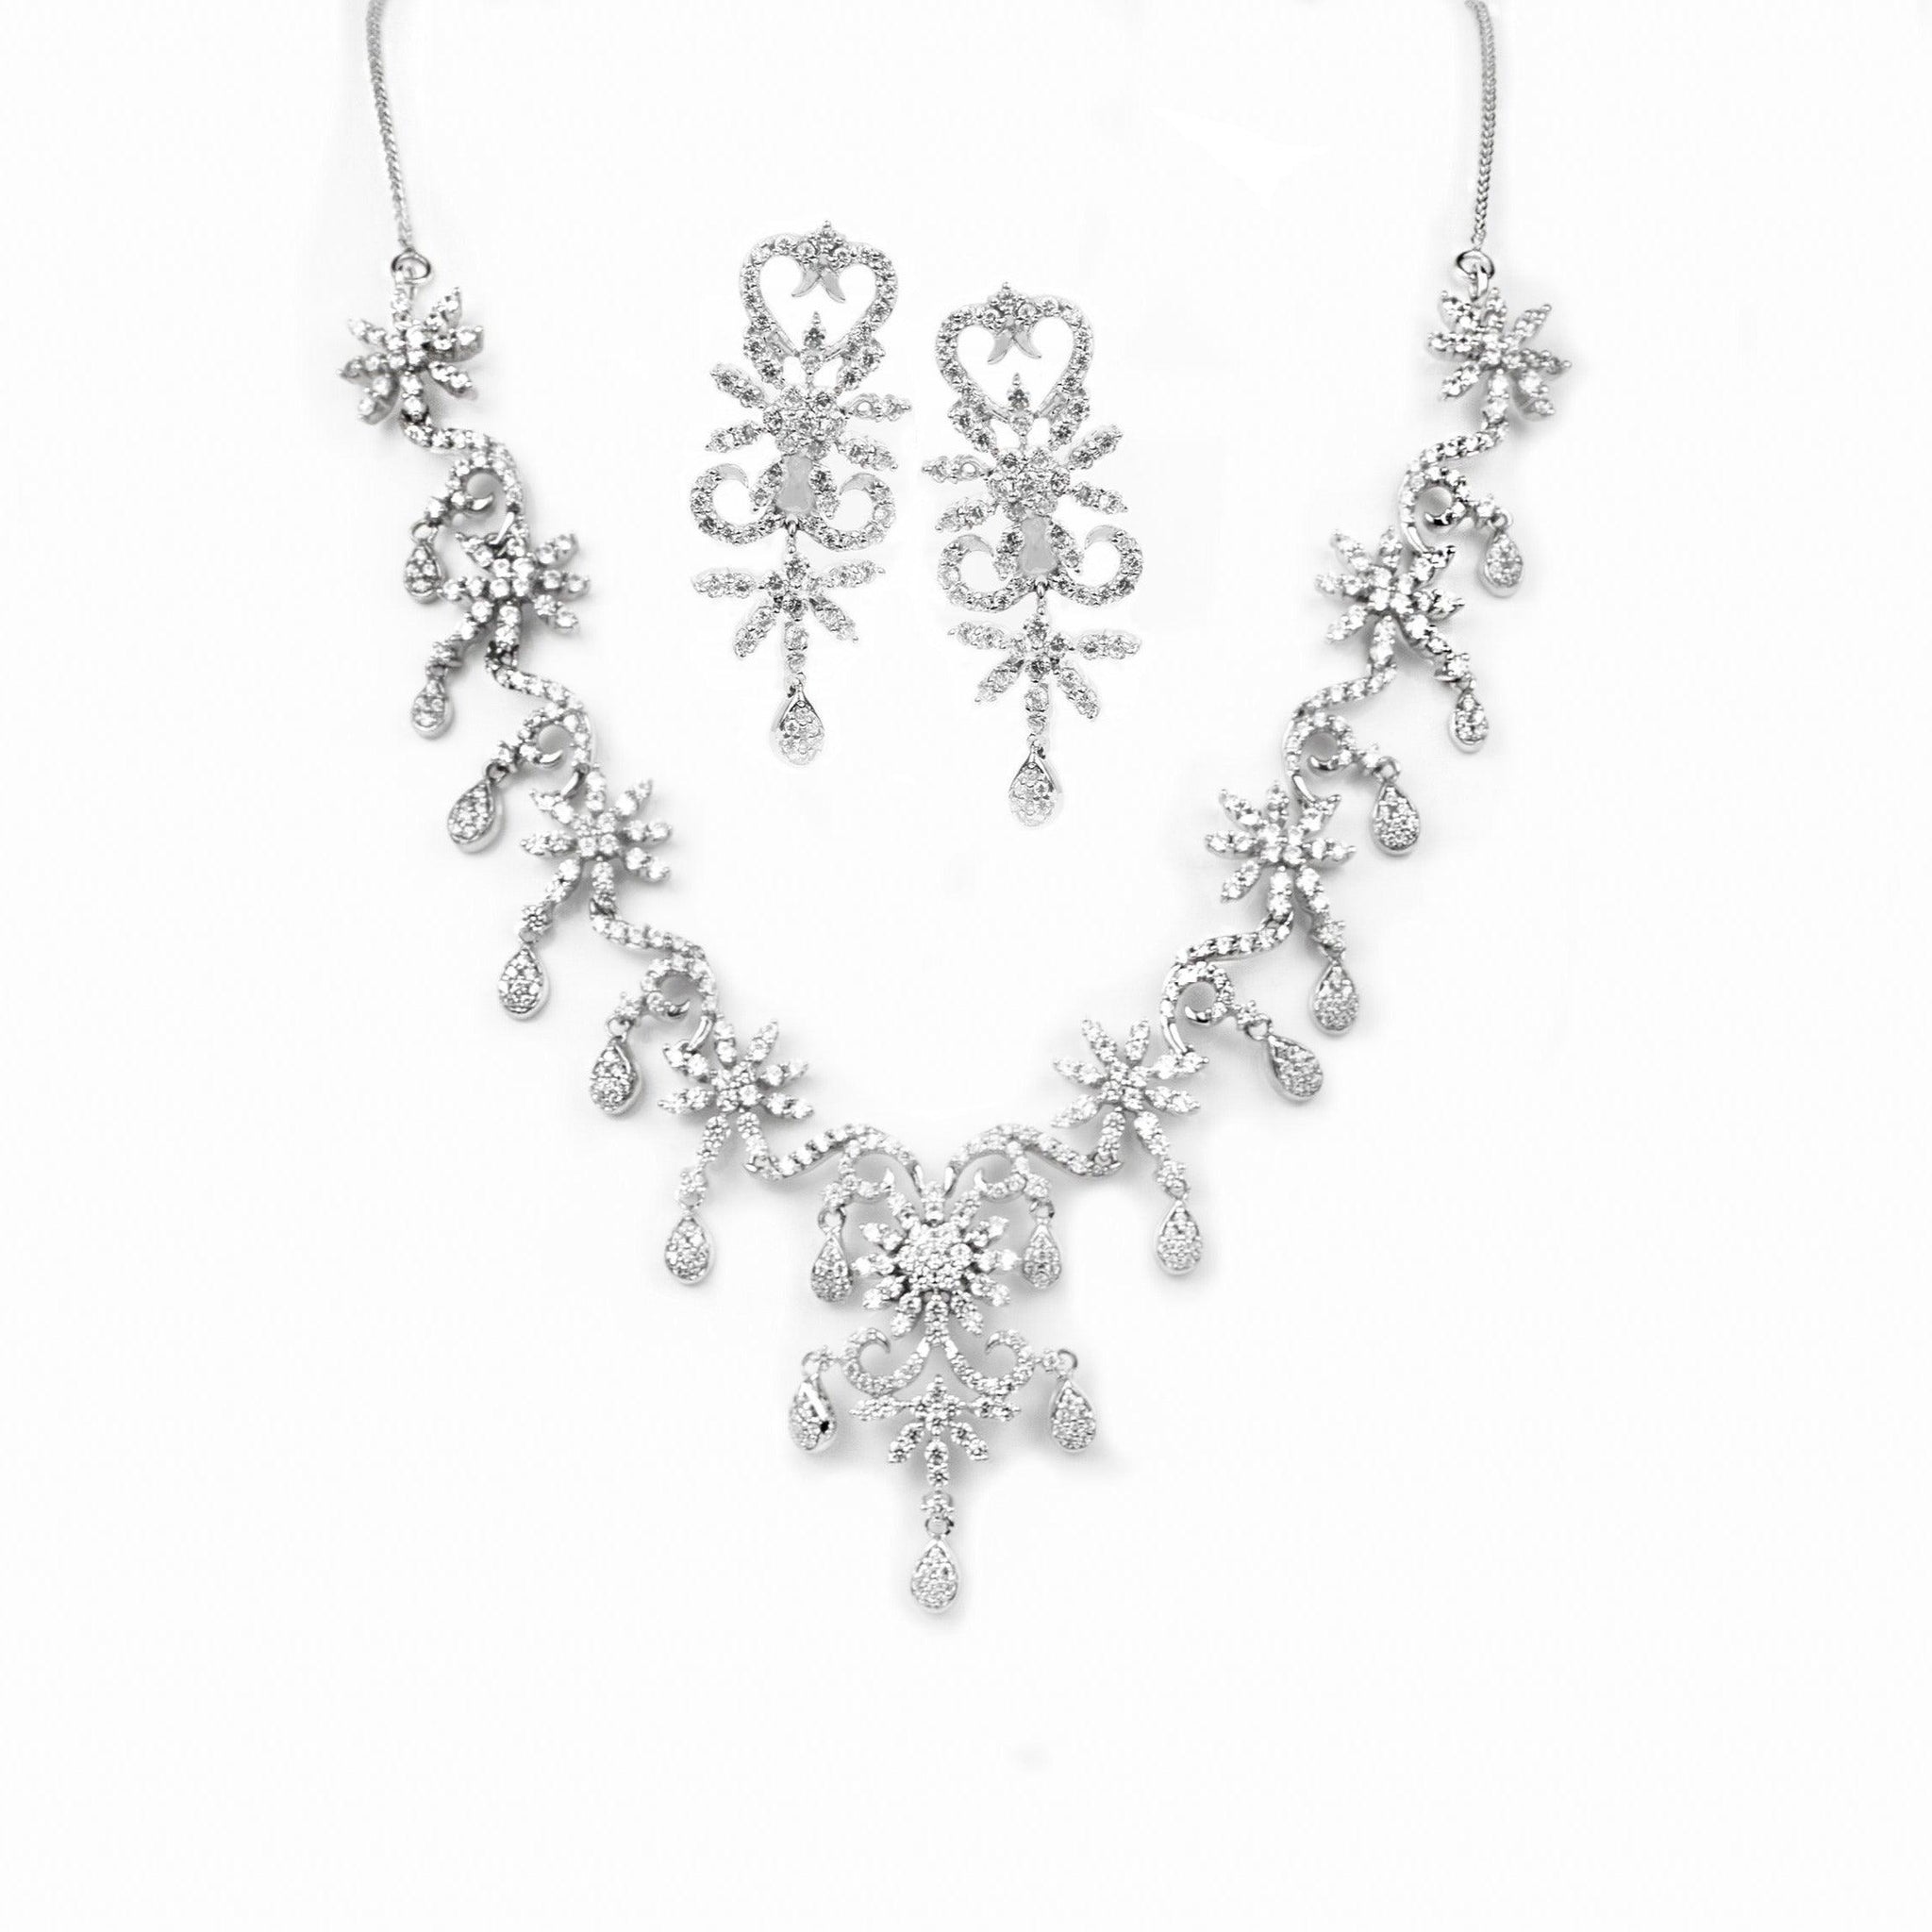 18ct White Gold Necklace and Earrings set with Cubic Zirconia stones (47.95g) N&E-90188